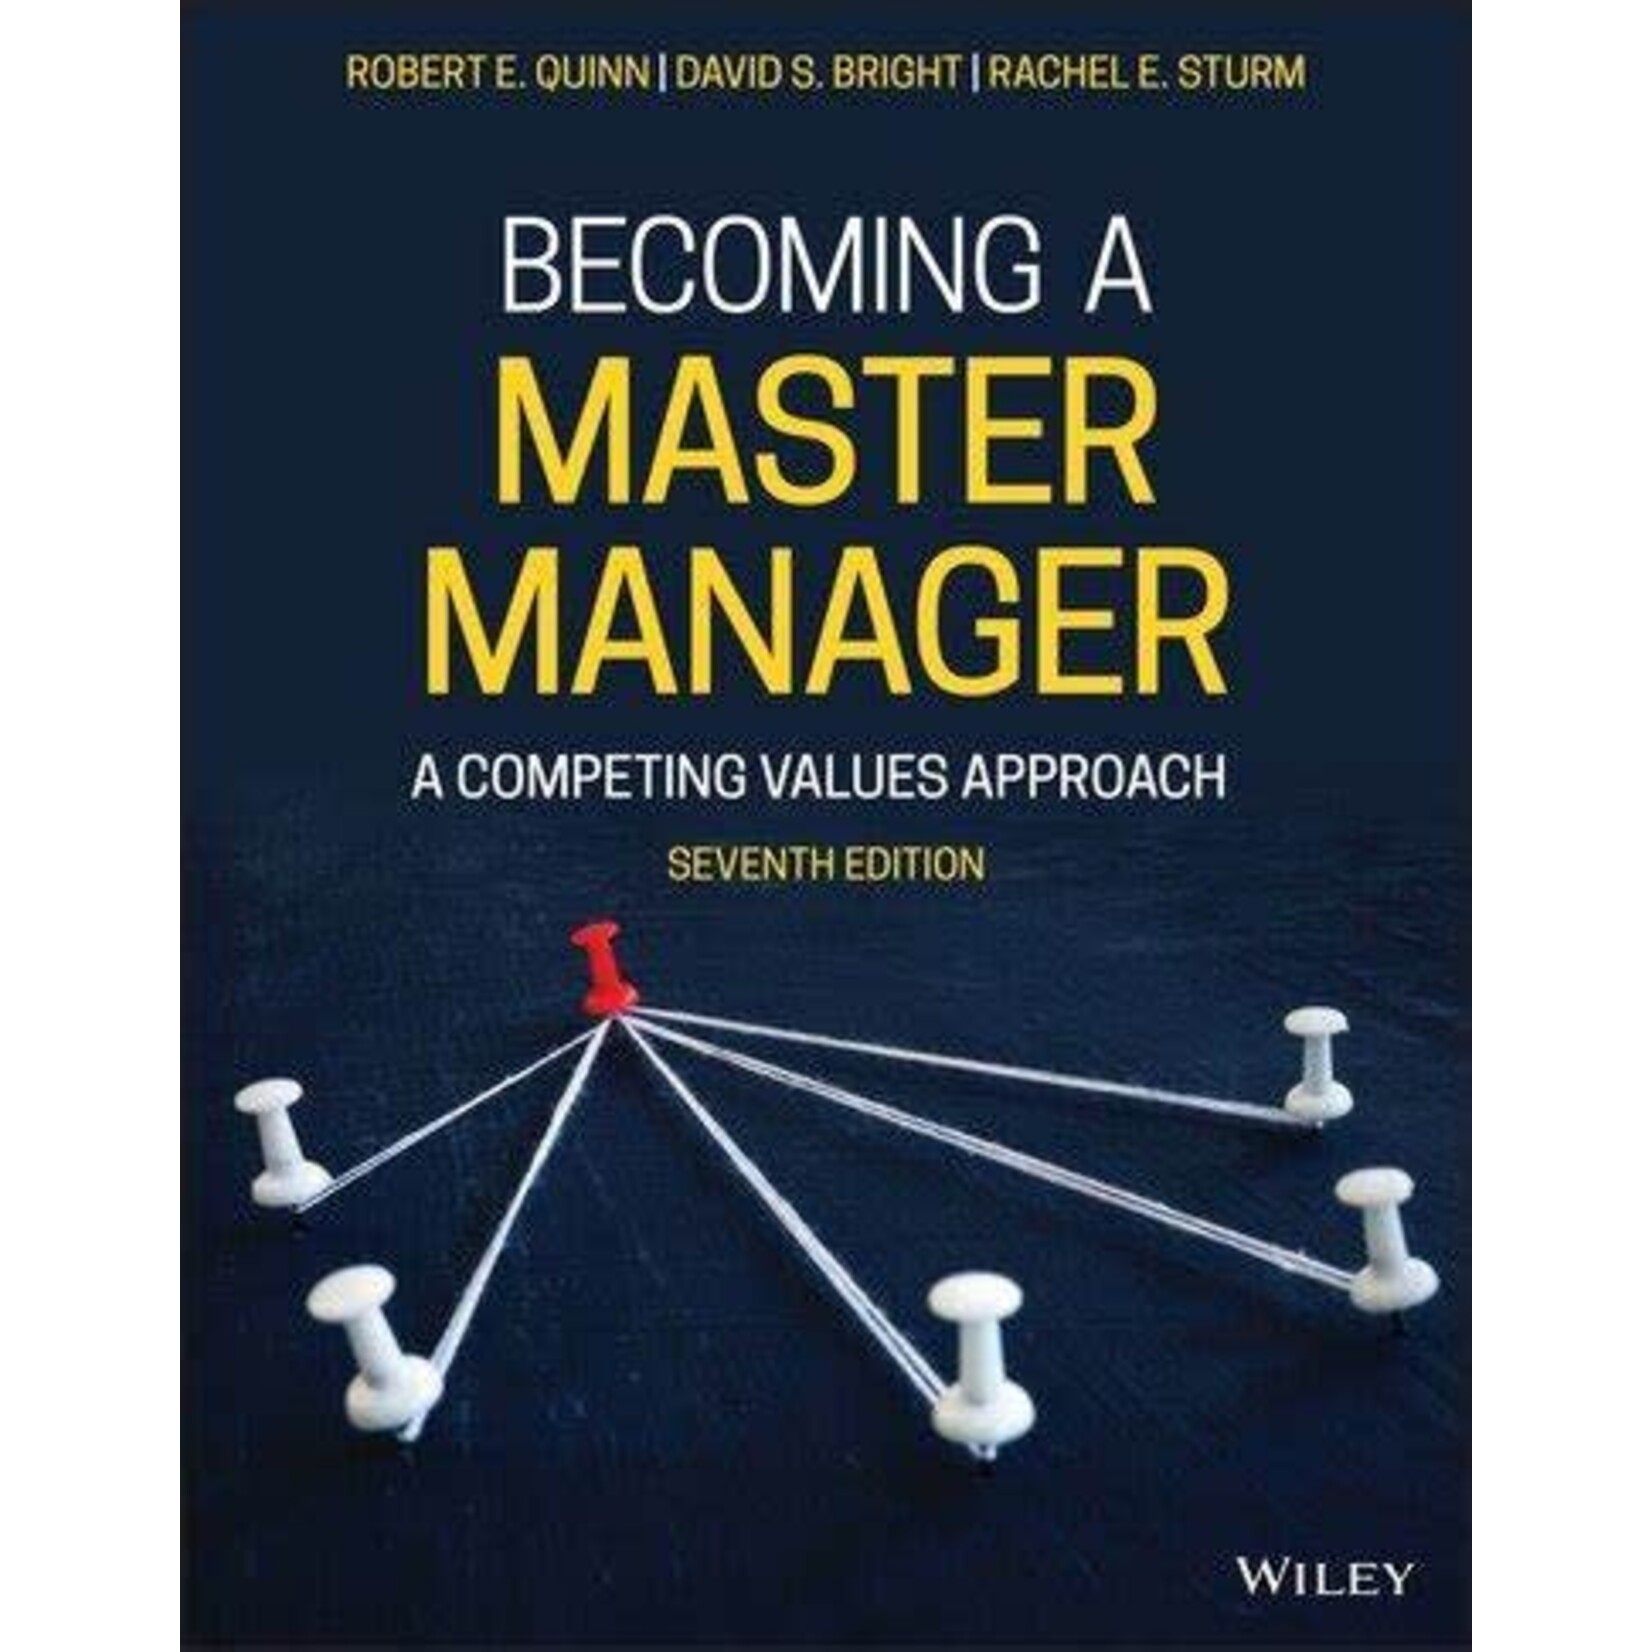 eBook Becoming a Master Manager, 7th Edition (Lifetime)